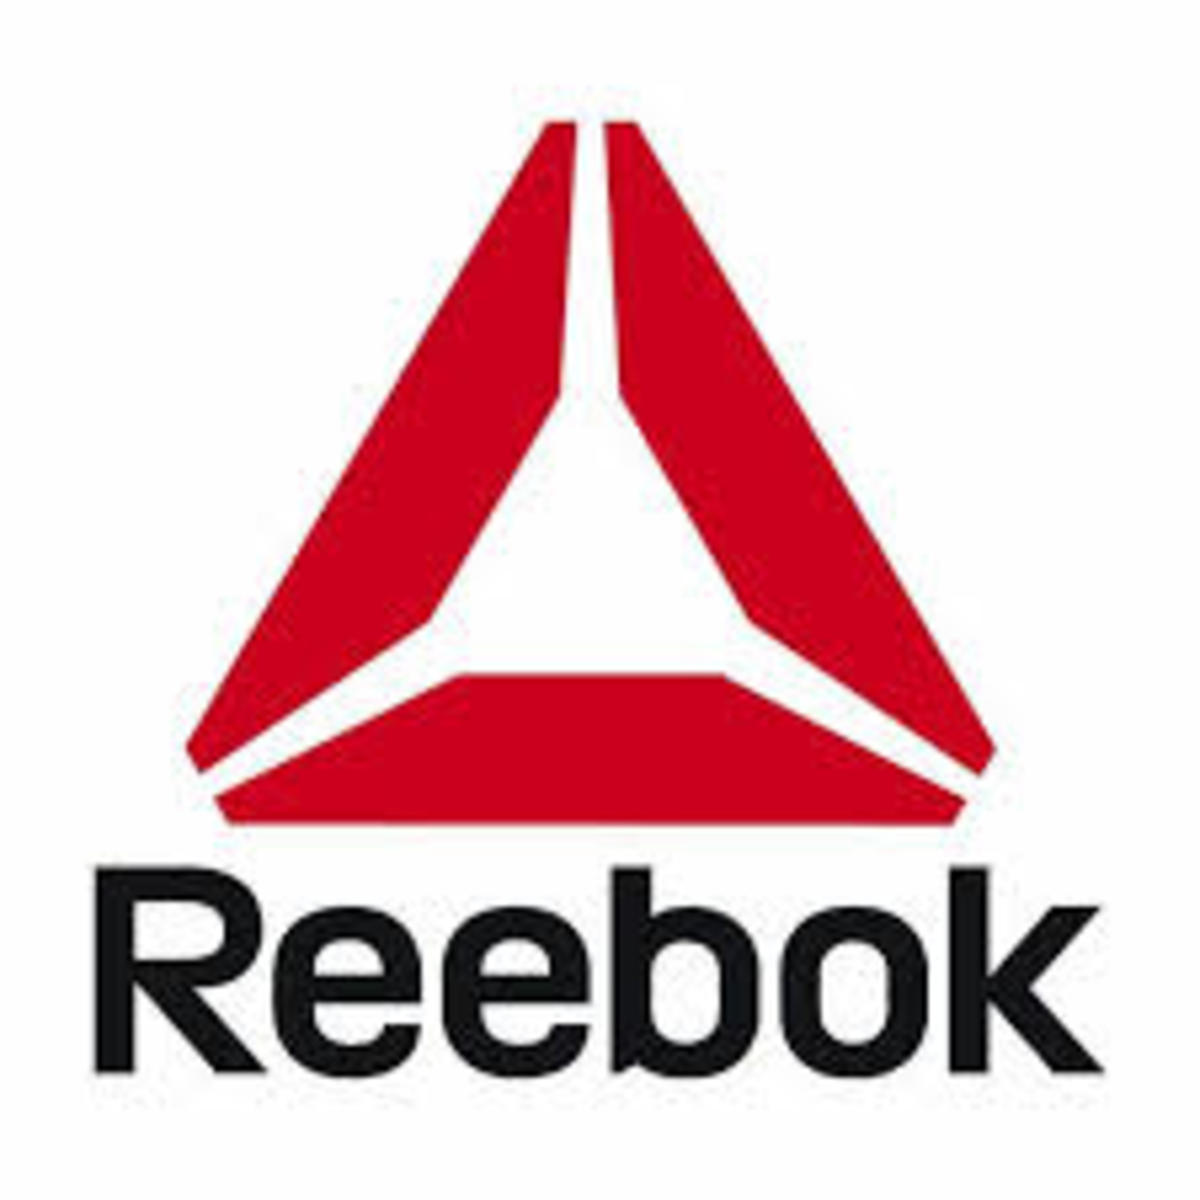 Reebok is bad for business